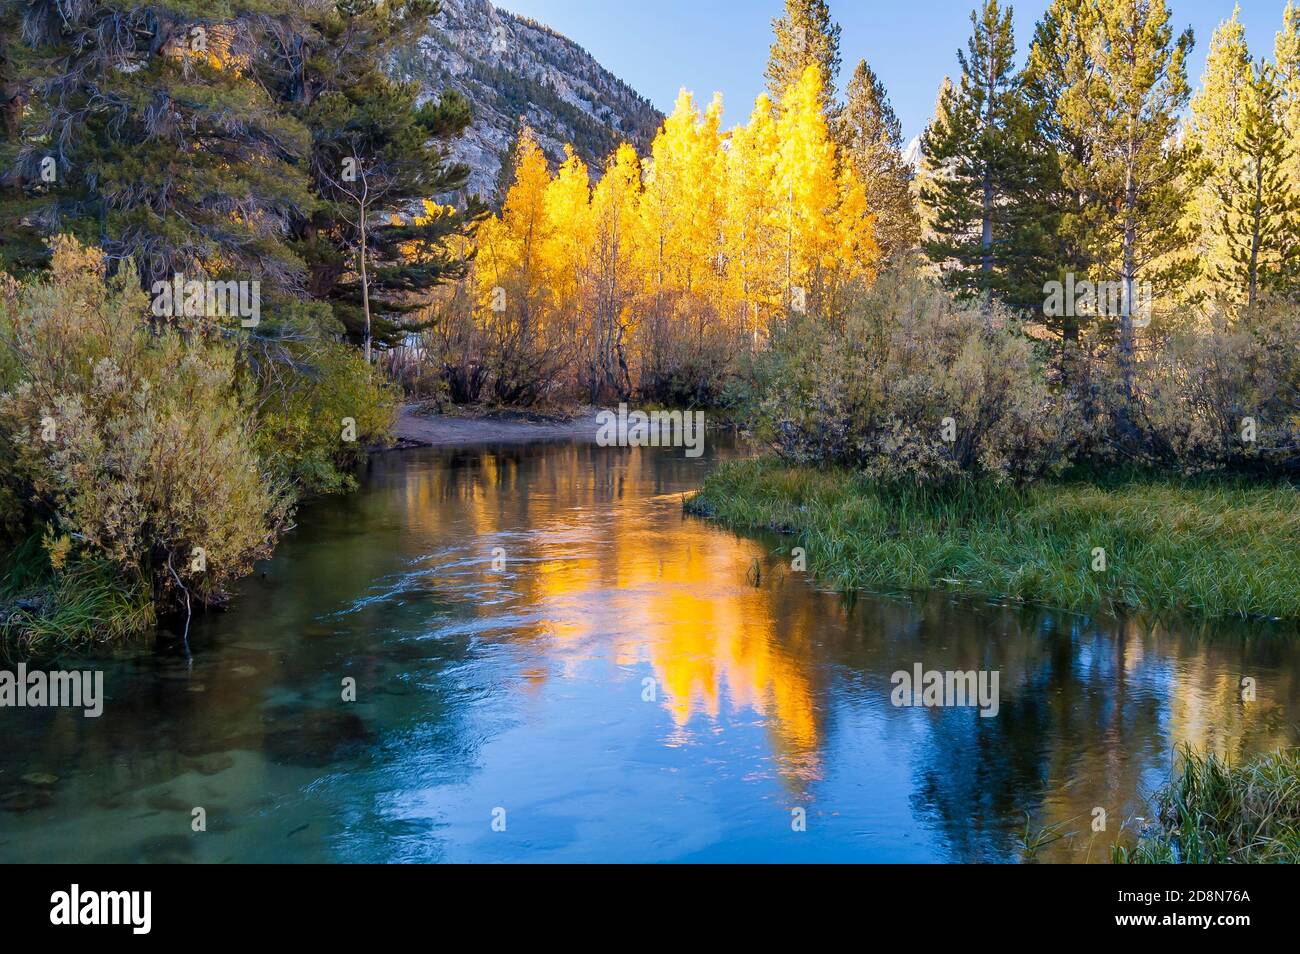 Autumn colors reflecting in a stream in the Sierra Nevada mountains. Stock Photo